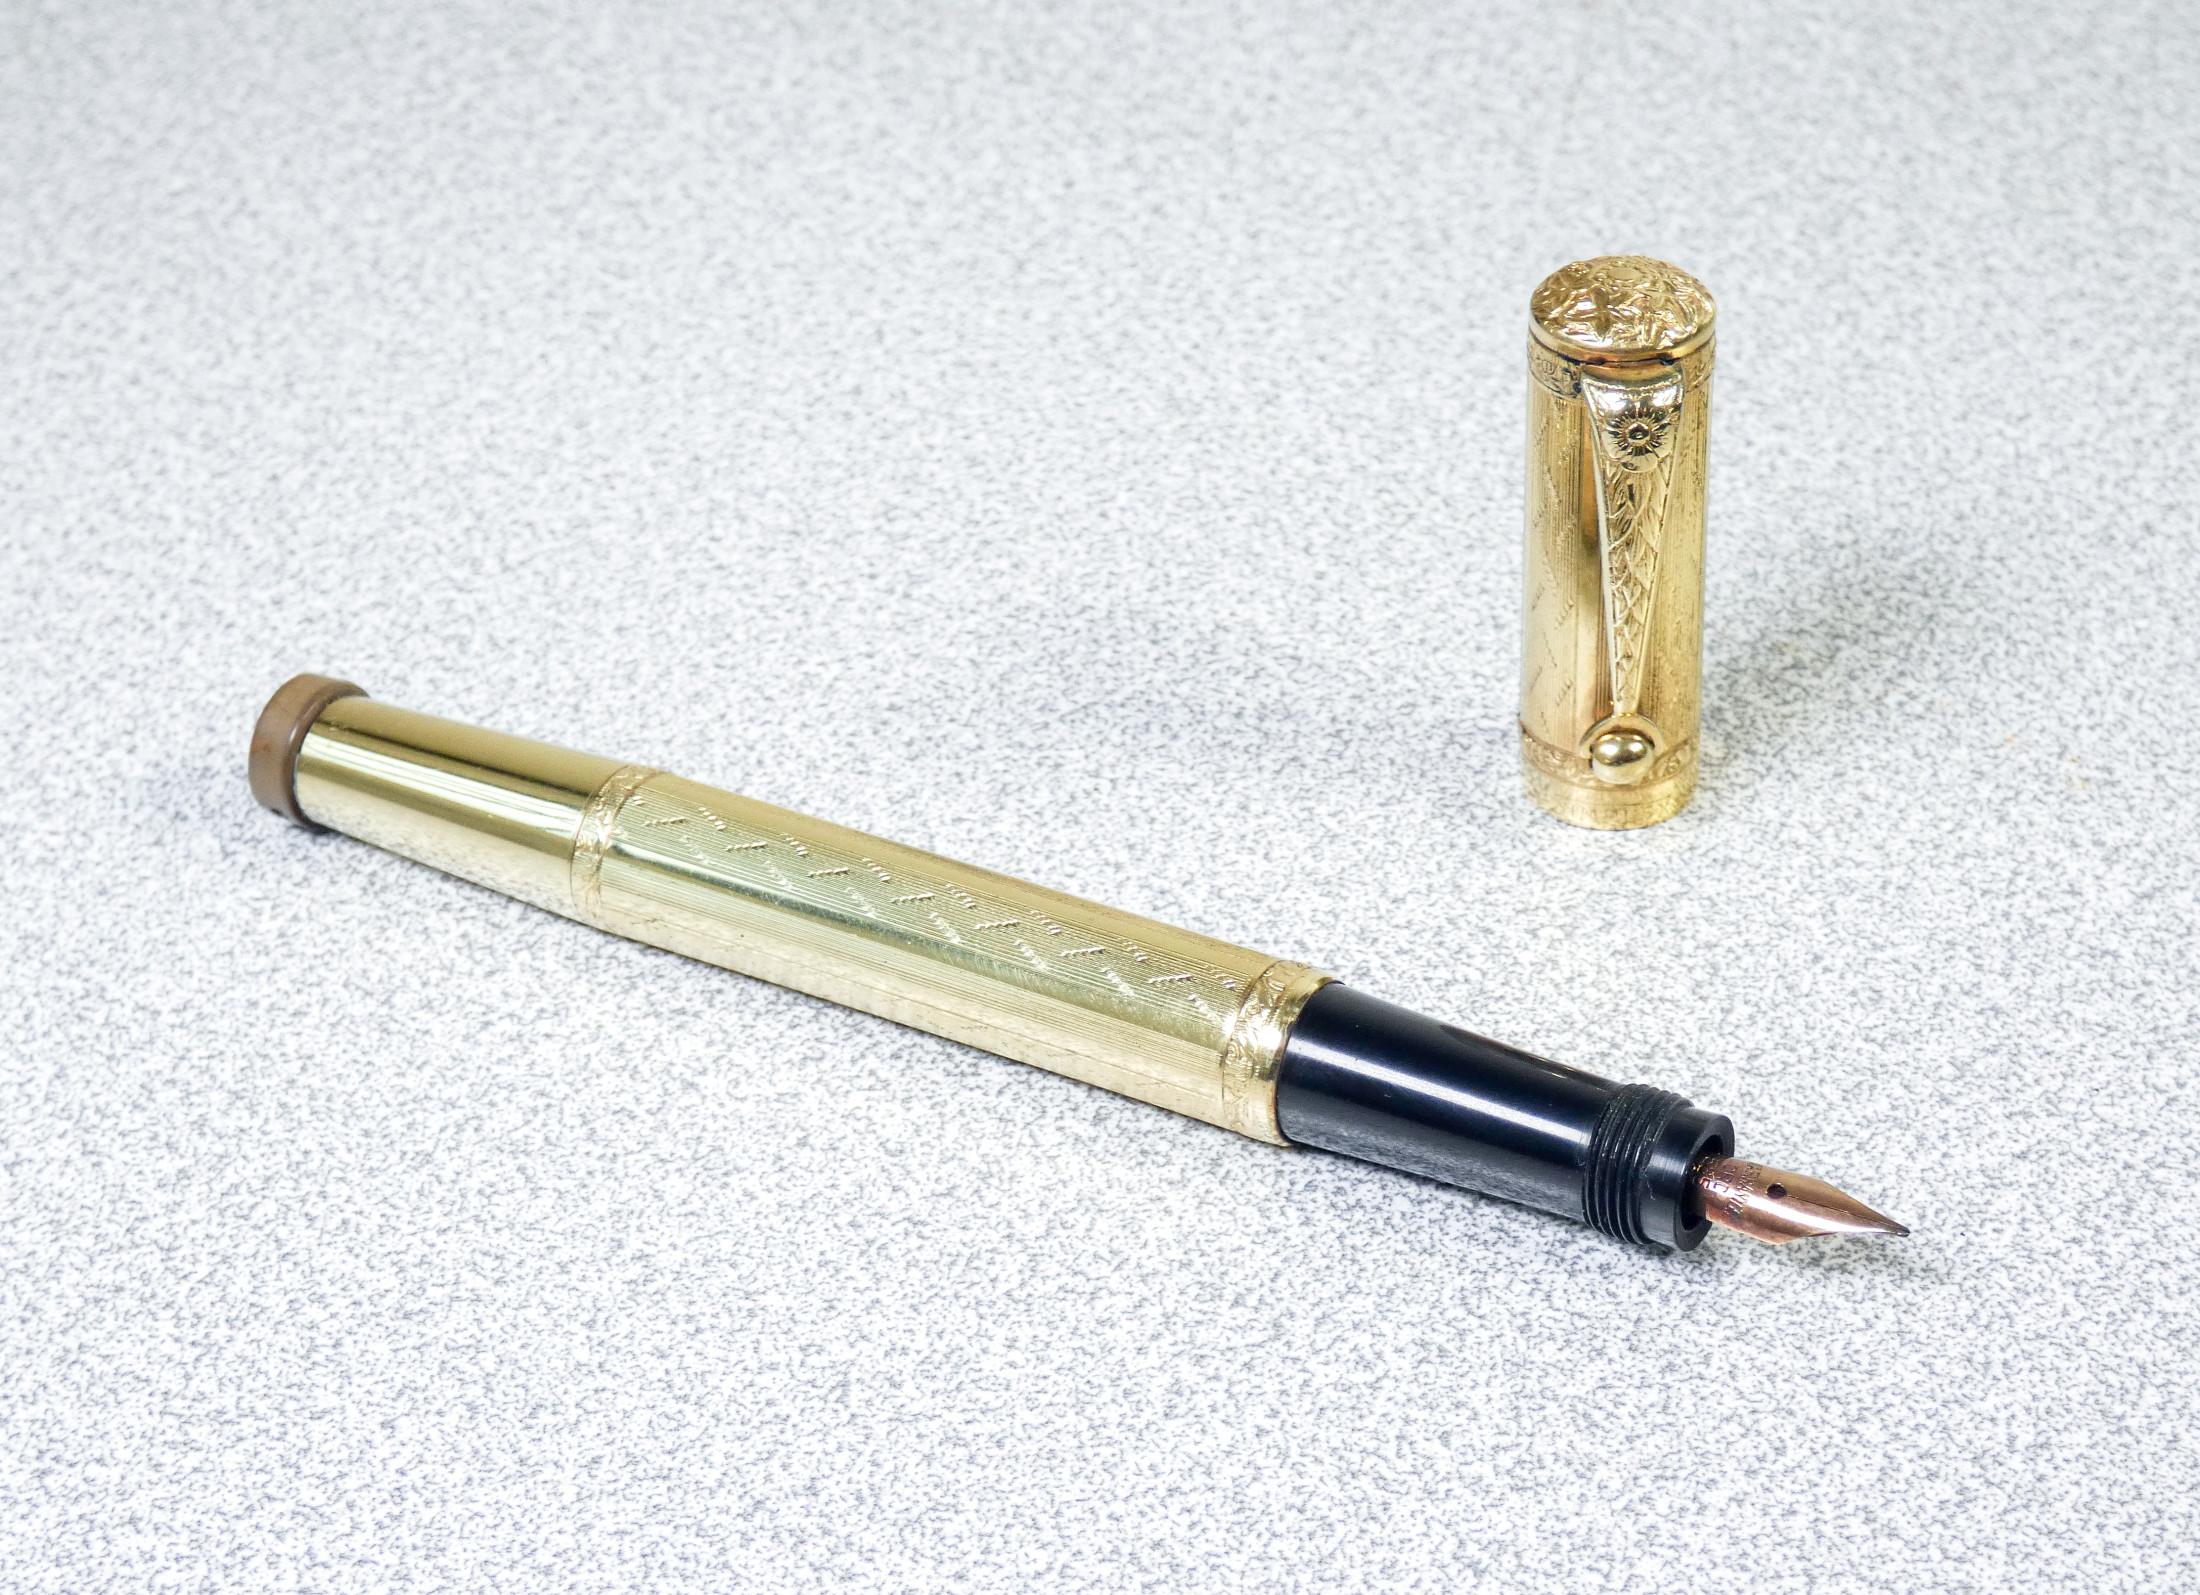 Safety fountain pen with retractable nib. SIMPLEX, gold laminated

PERIOD
1920s

BRAND
Simplex

MODEL
Fountain pen with retractable nib, safety

MATERIALS
Ebonite, gold laminated

DIMENSIONS
120 mm

CONDITIONS
The pen is in very